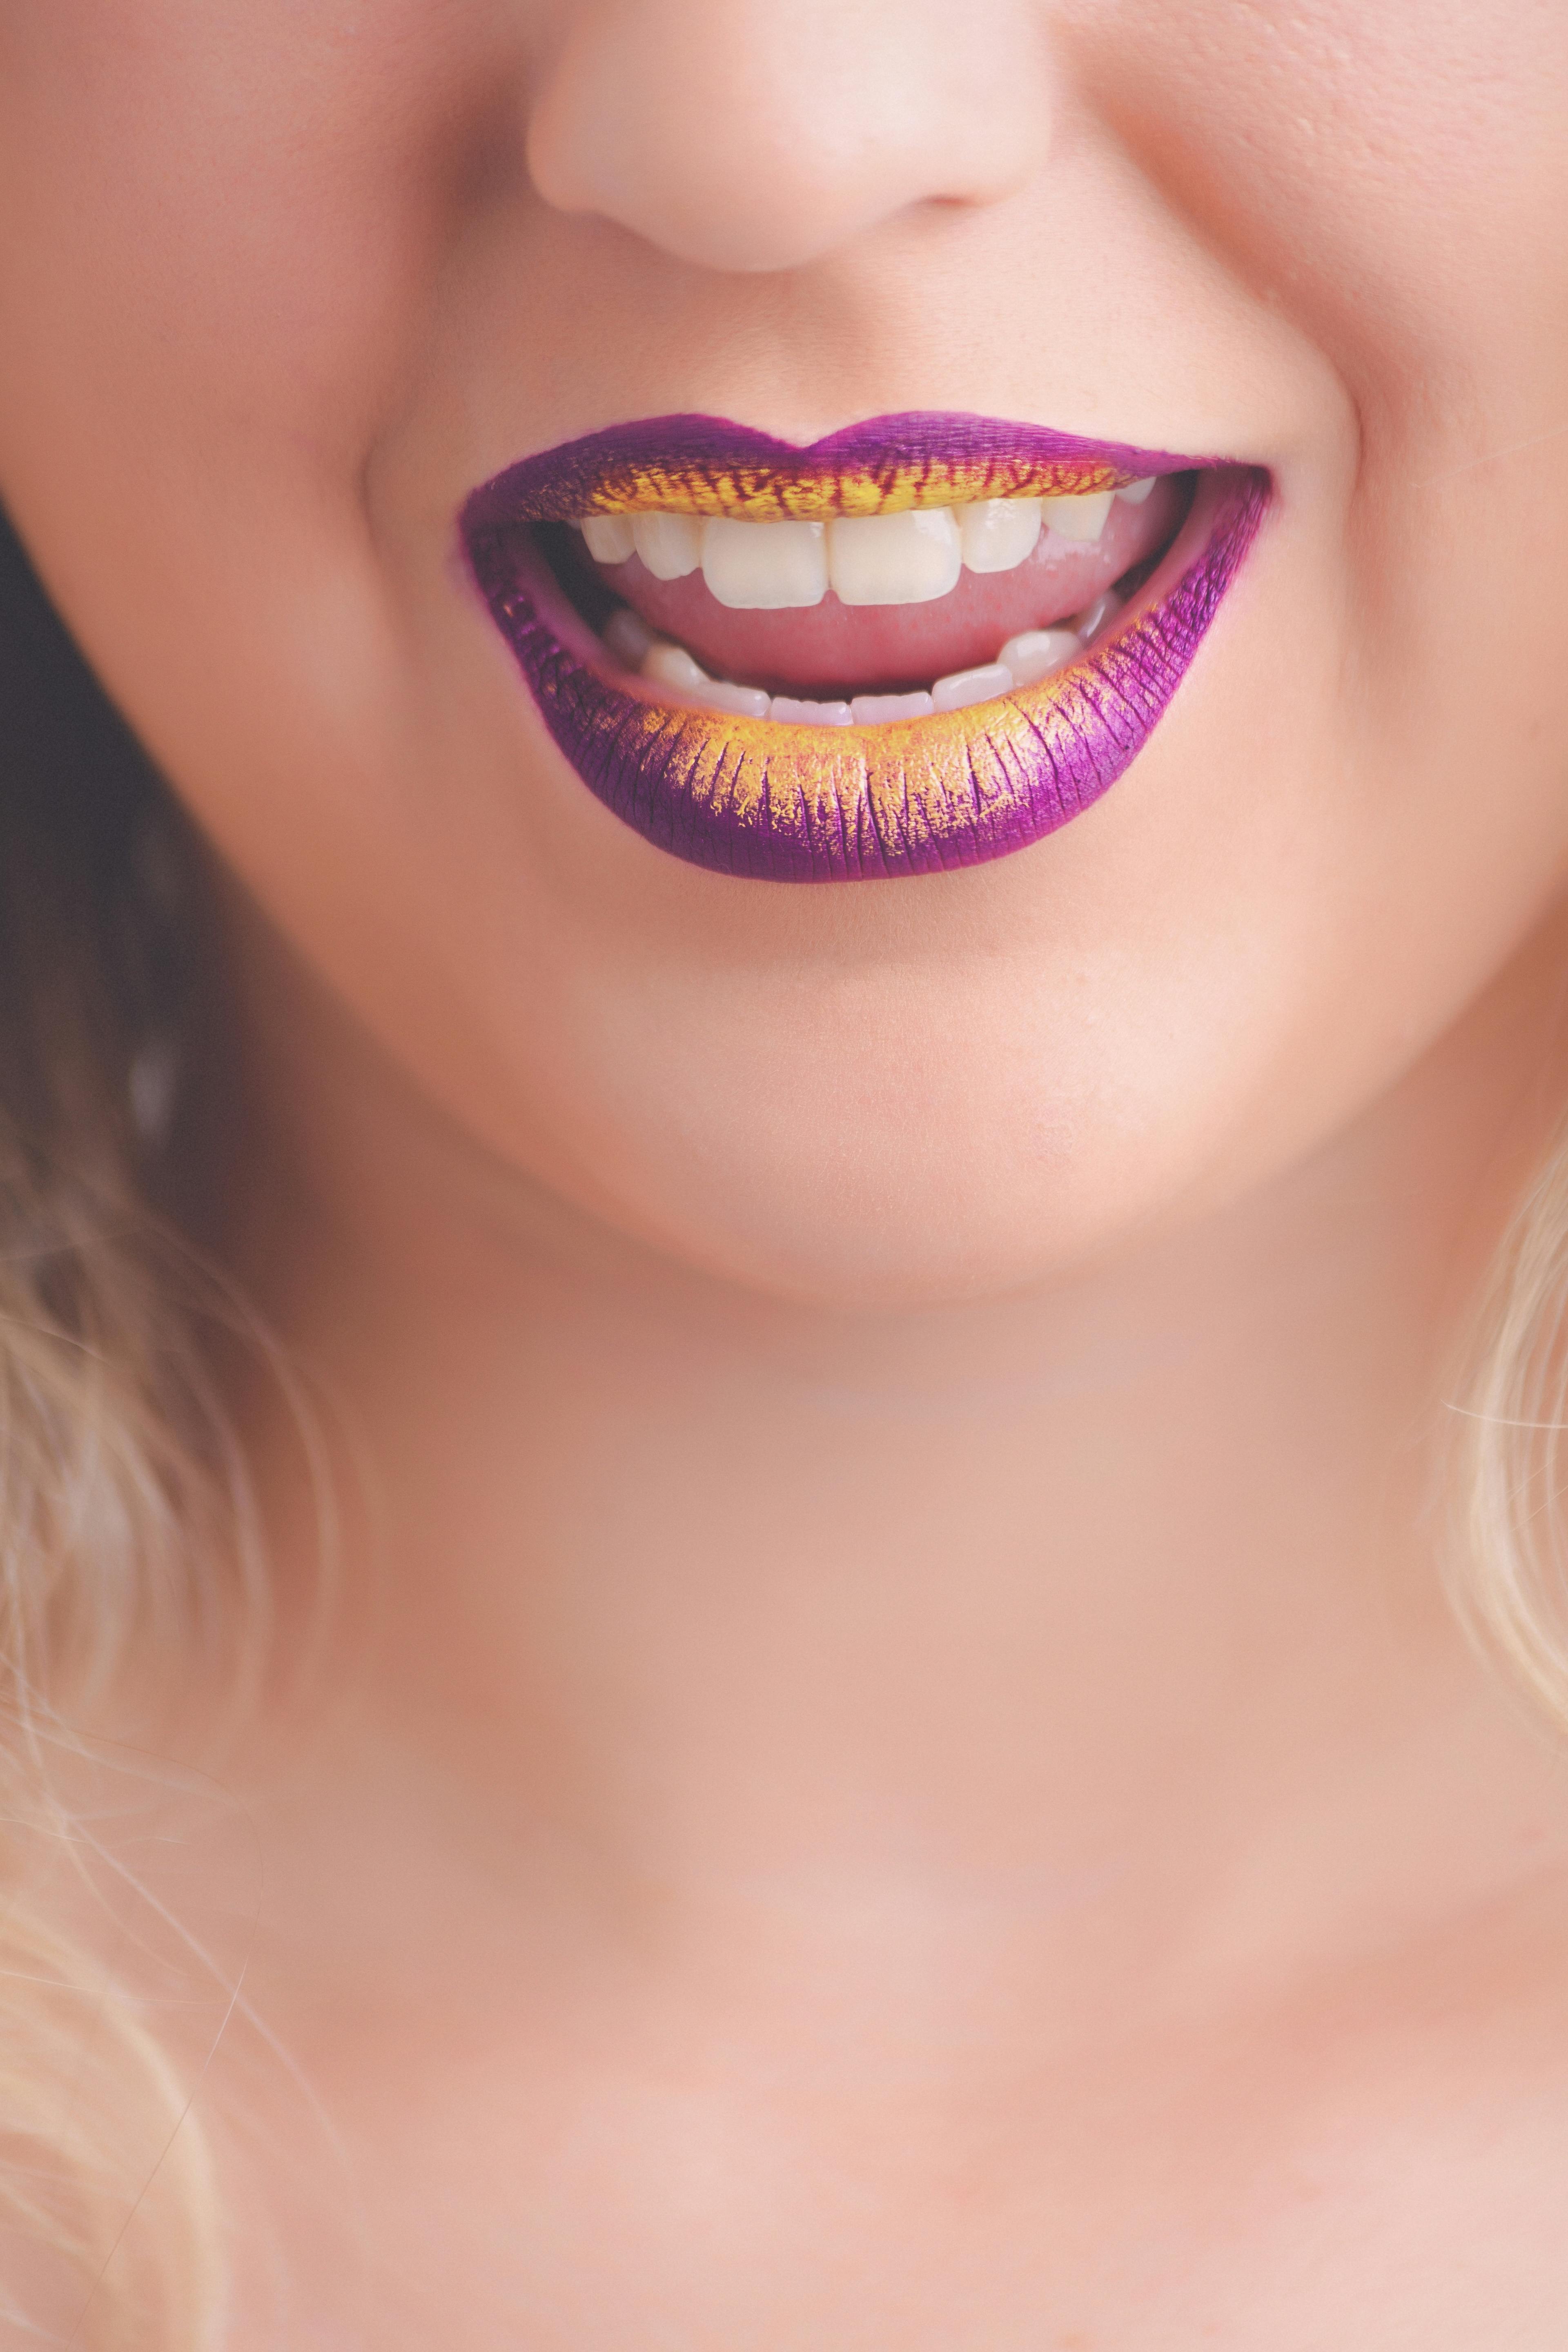 Download Woman With Purple And Yellow Lipstick Open Mouth Free Stock Photo Yellowimages Mockups